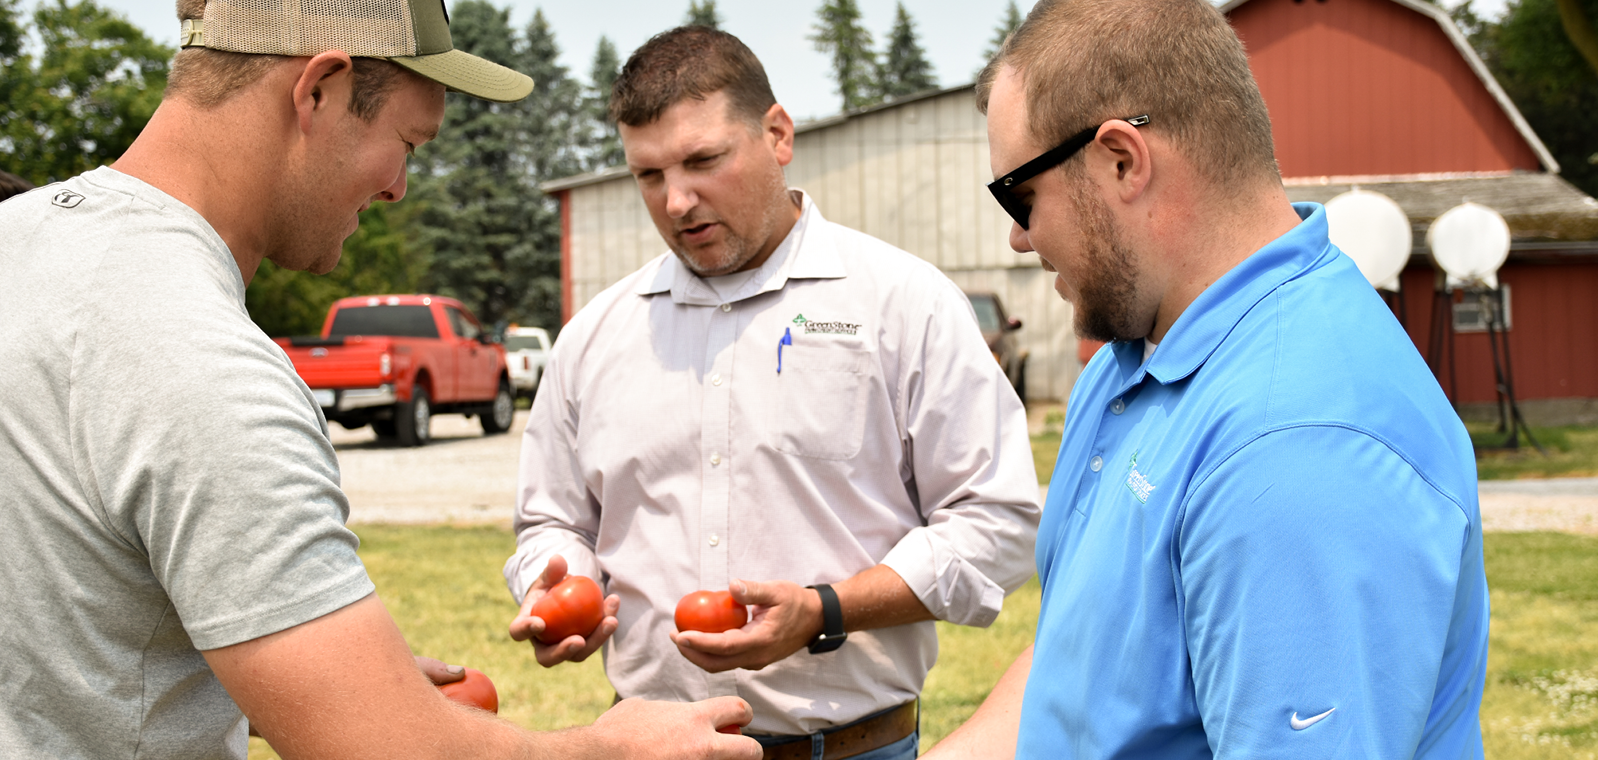 GreenStone employees holding tomatoes with farmers